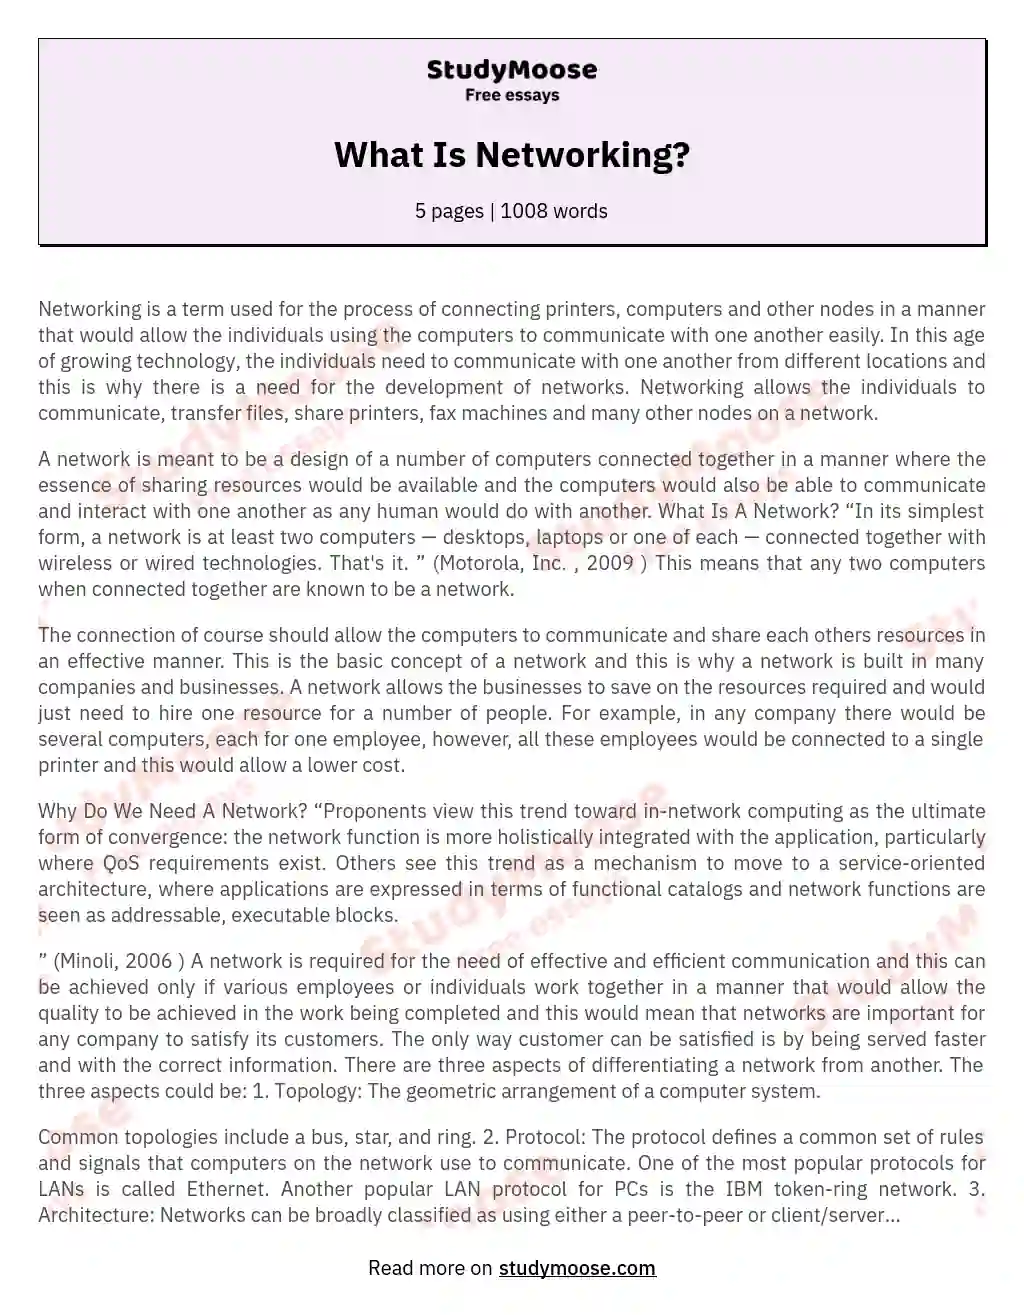 sample of networking essay